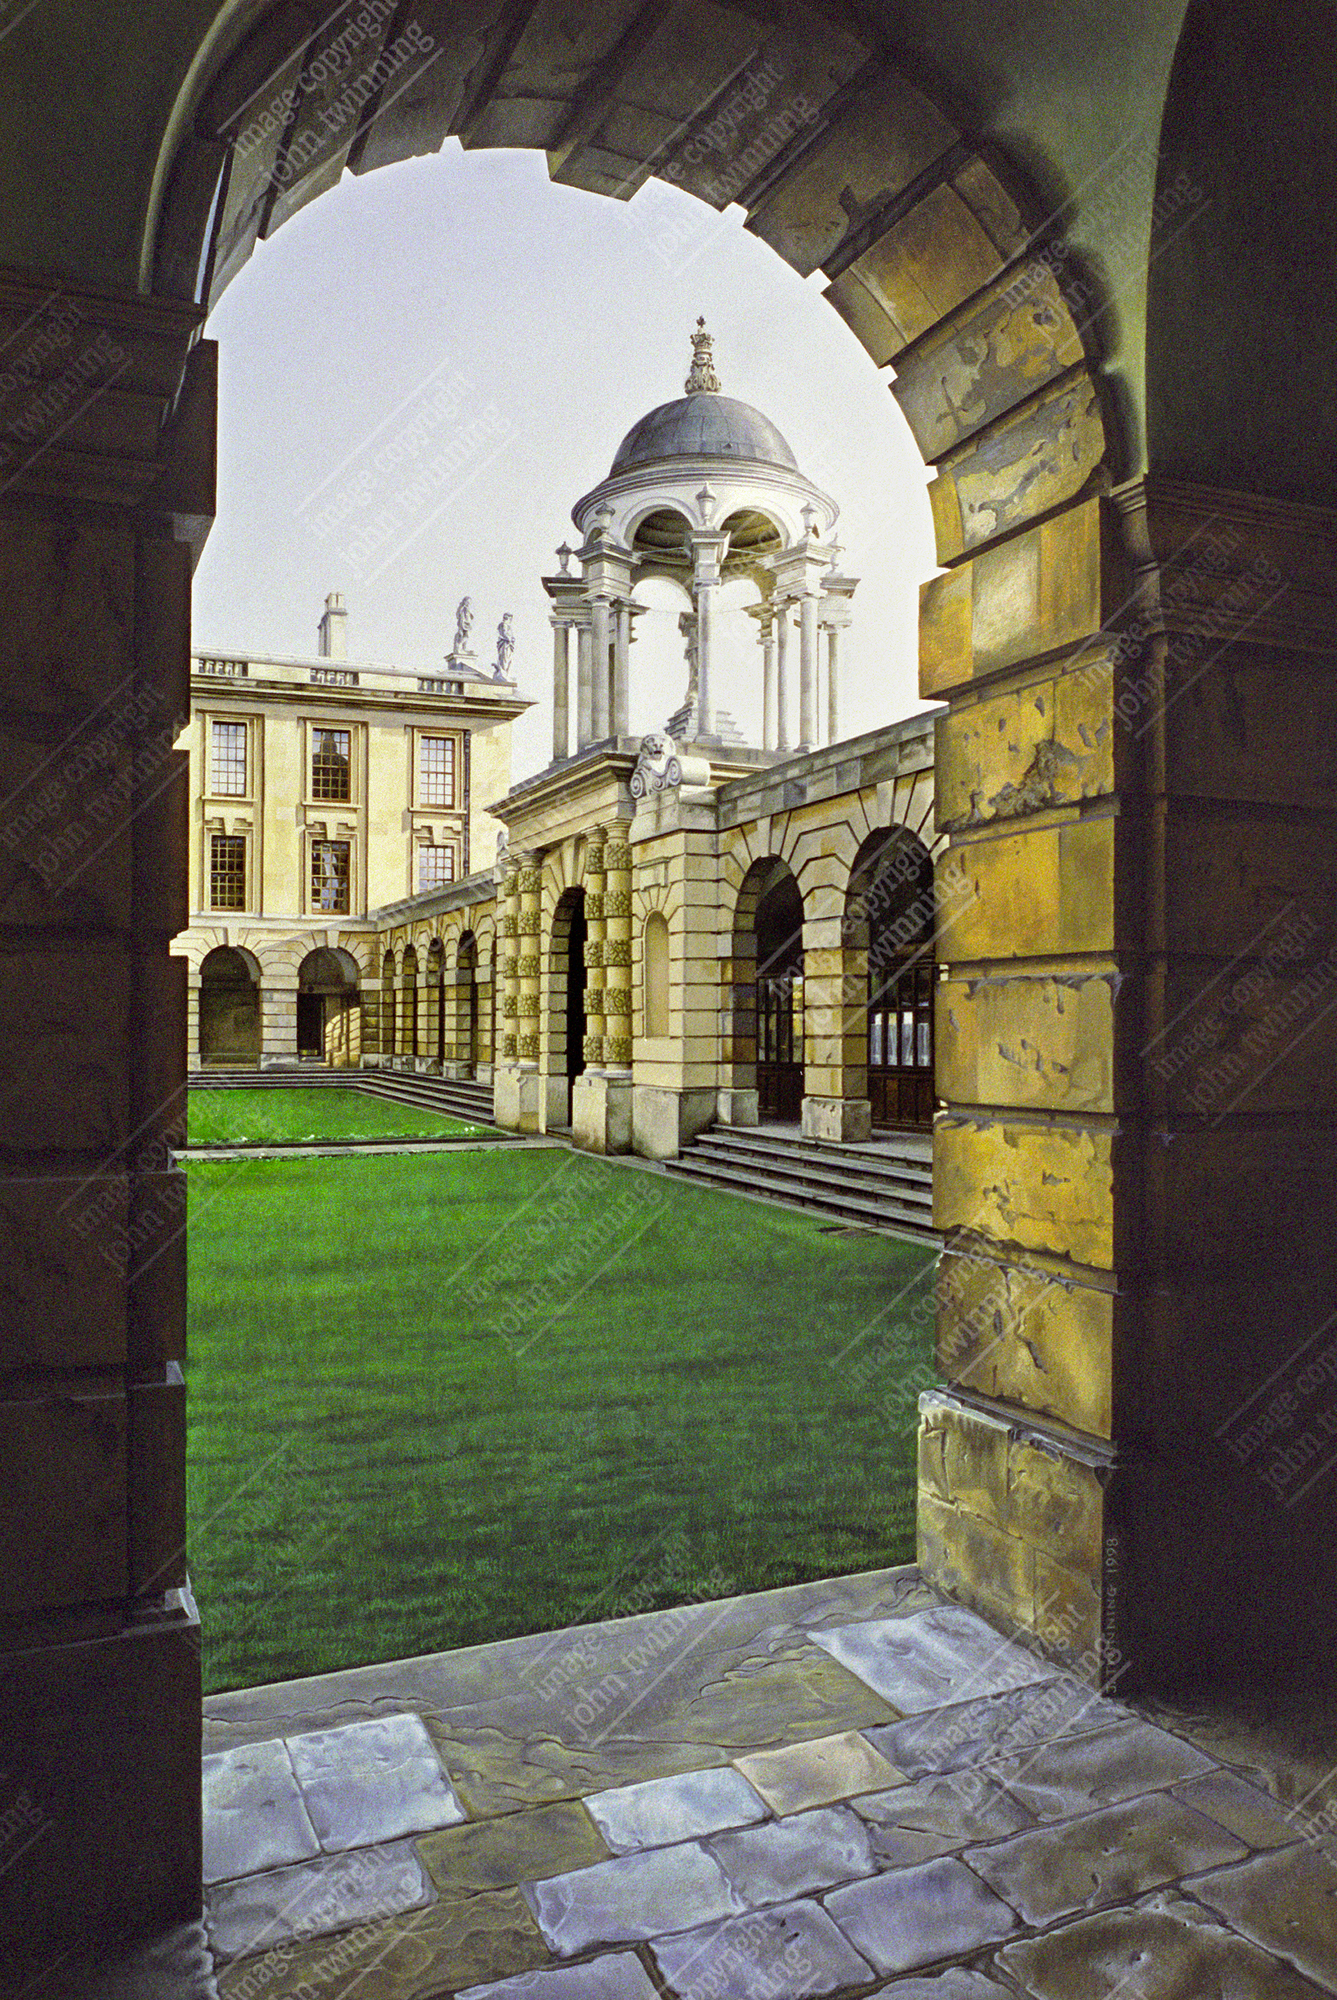 40% off! The Queen’s College: front quad and cupola